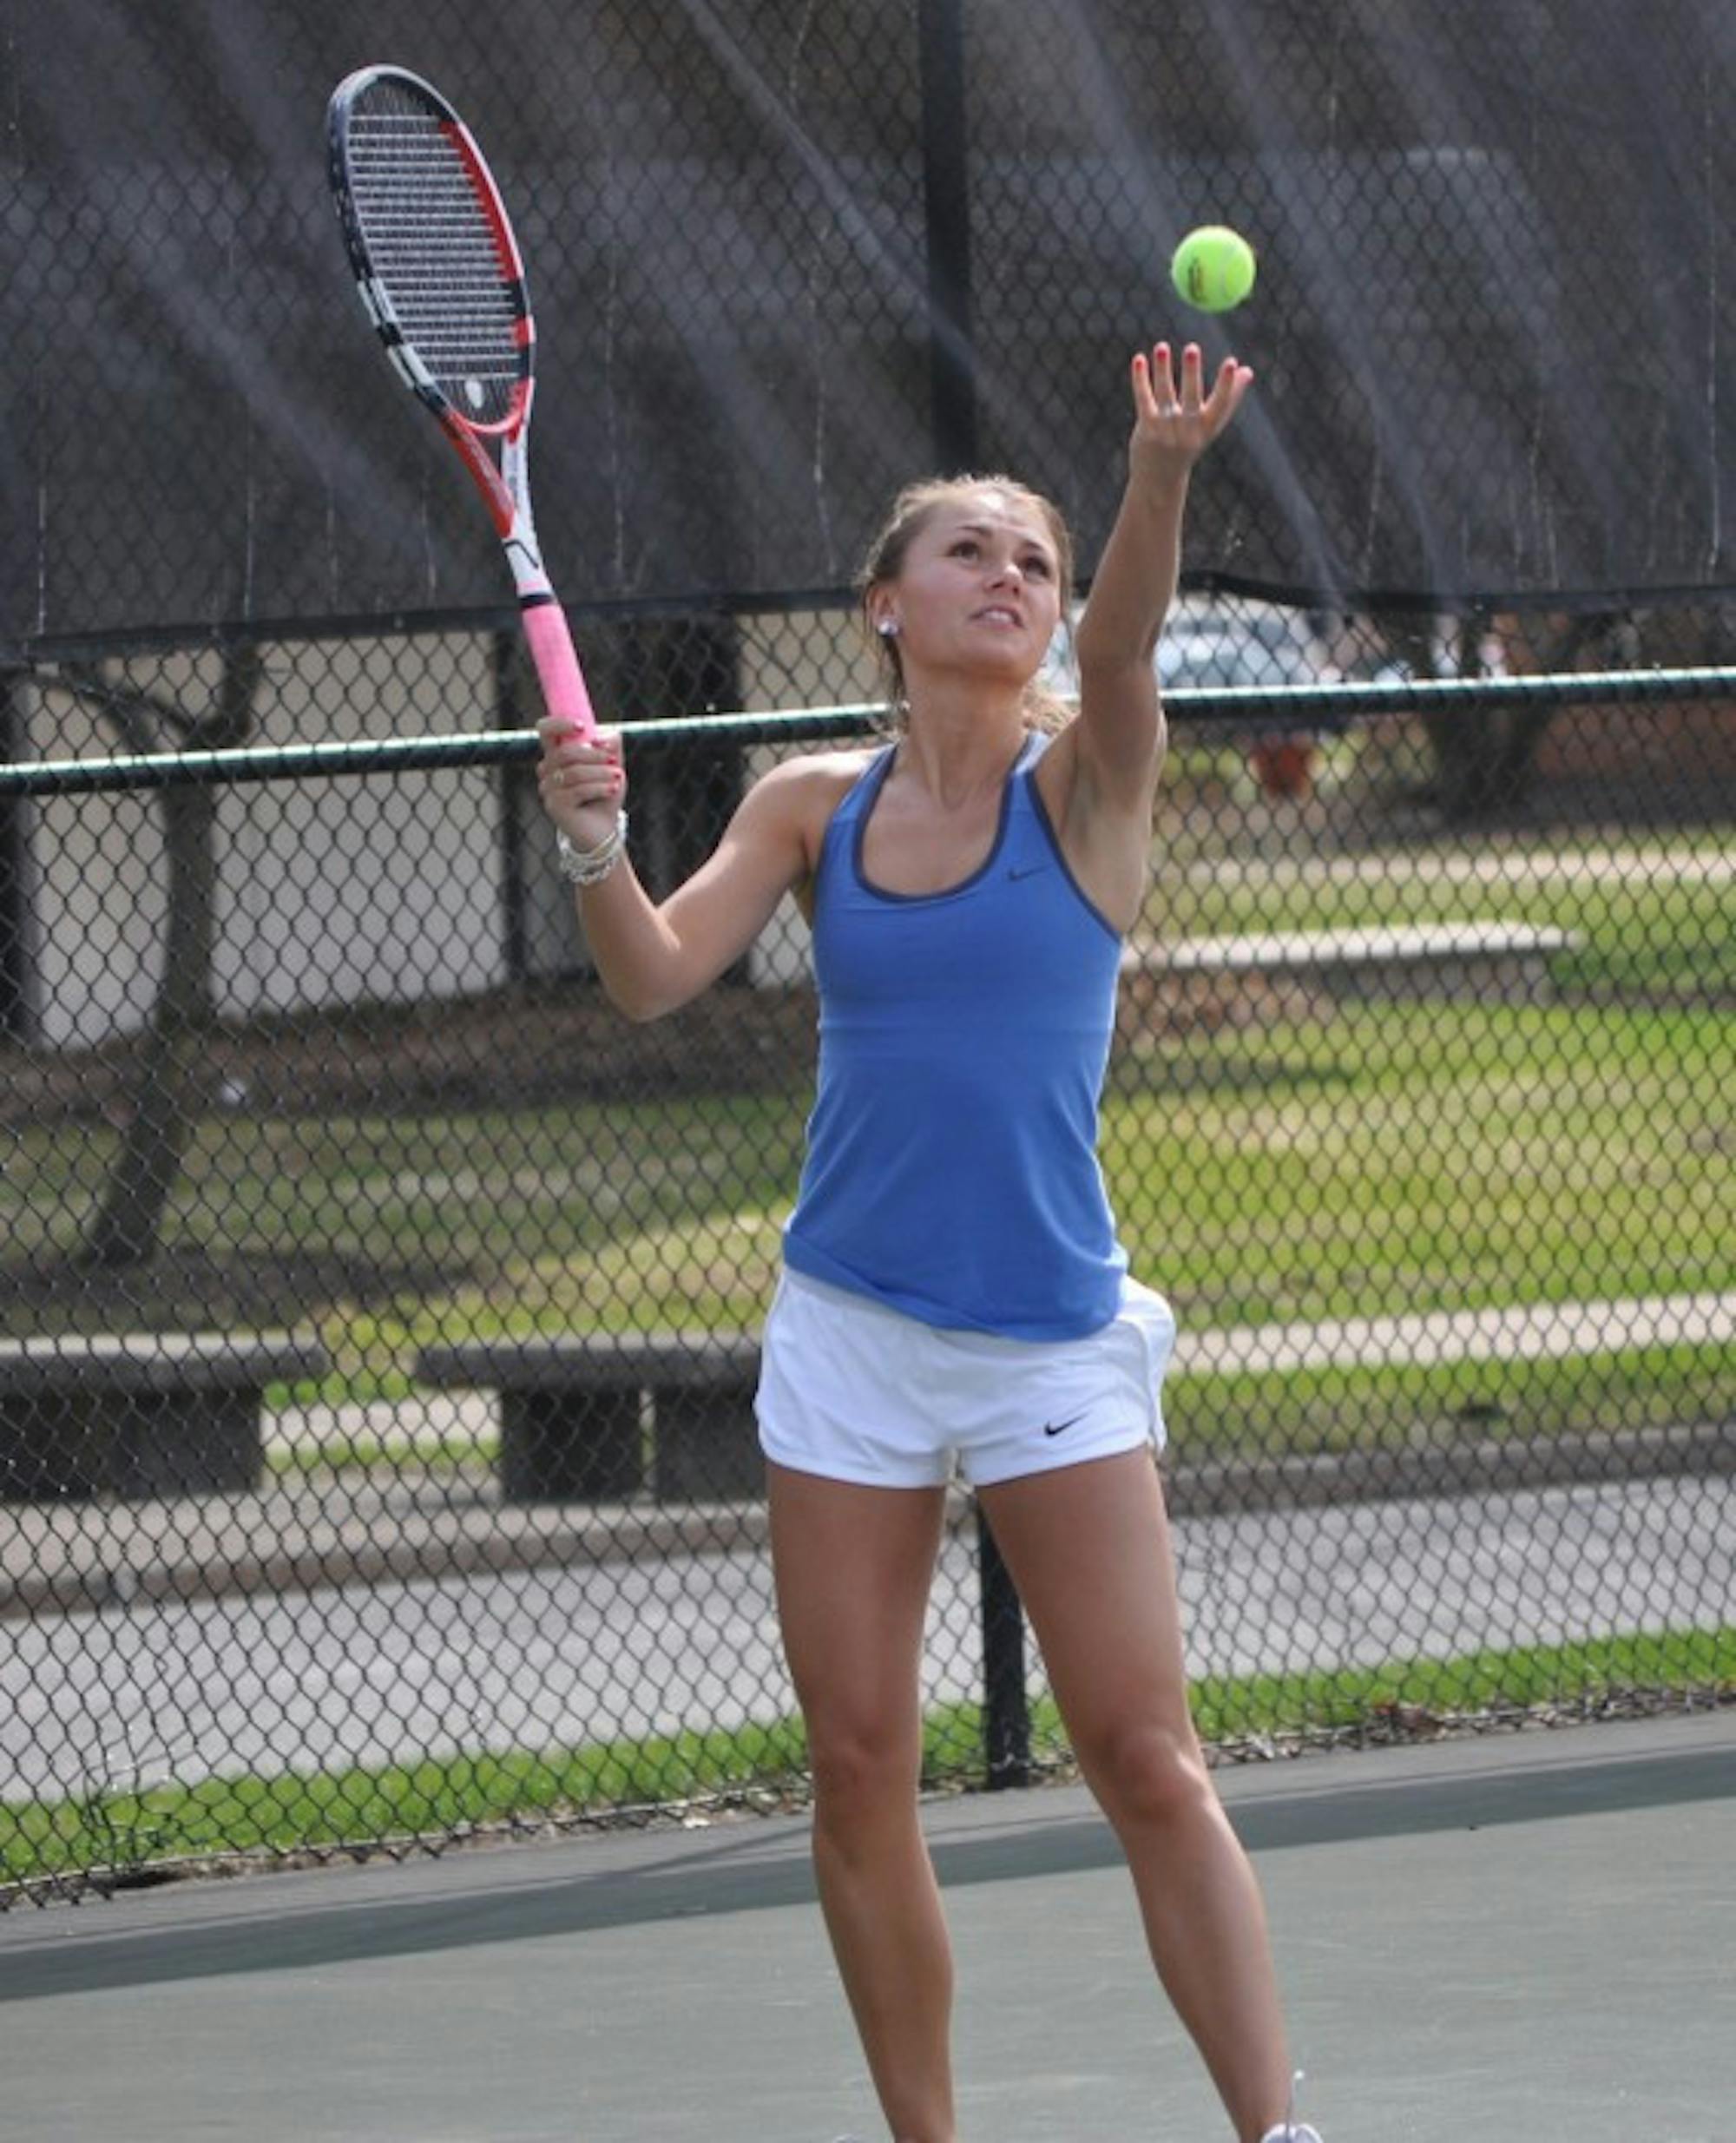 Belles senior Kayle Sexton serves during an 8-1 loss to Hope on April 17, 2014. Sexton is 4-2 over her last six singles matches for the Belles.